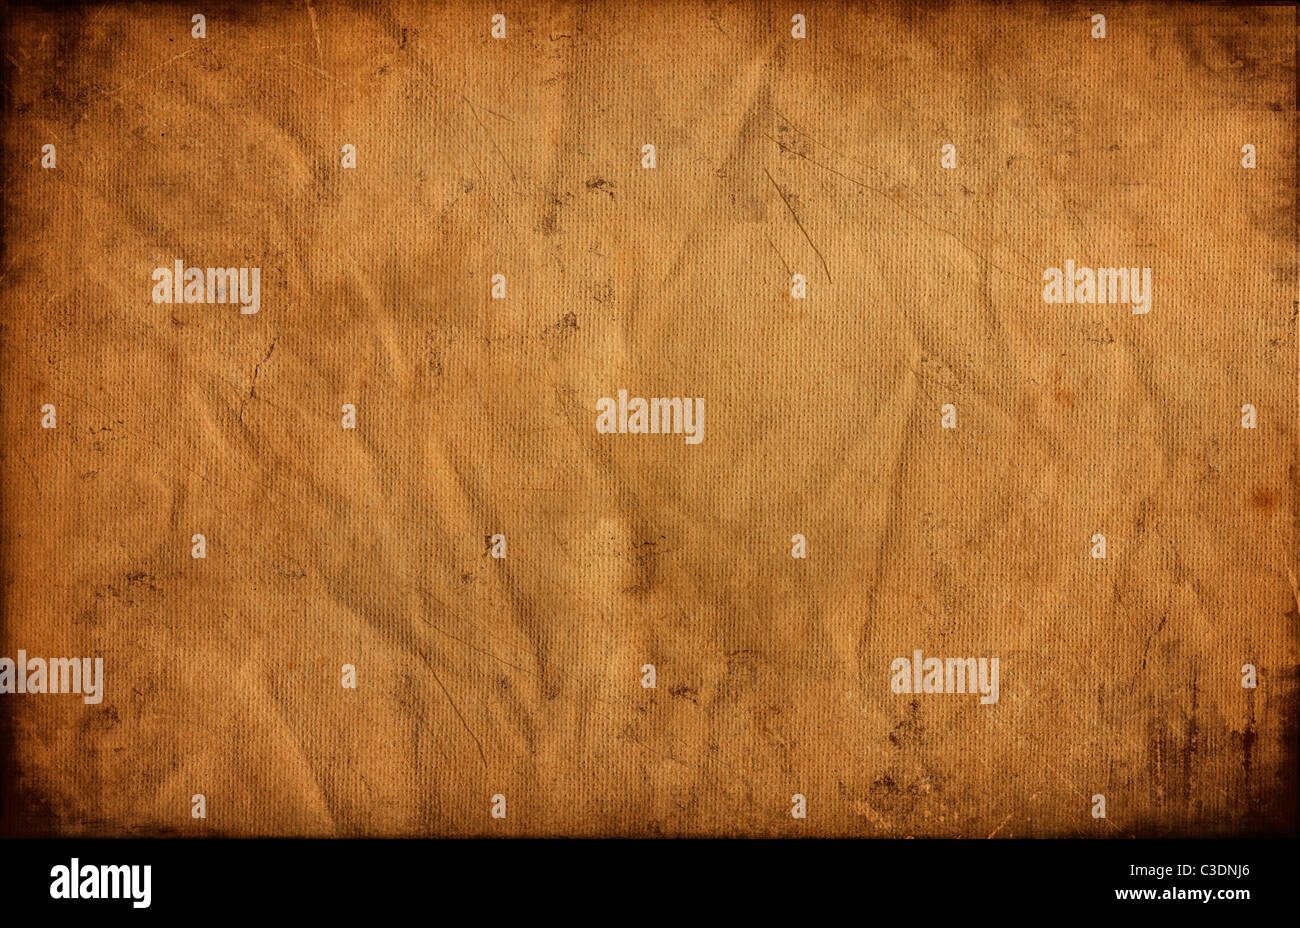 Old grunge style background with canvas paper effect Stock Photo